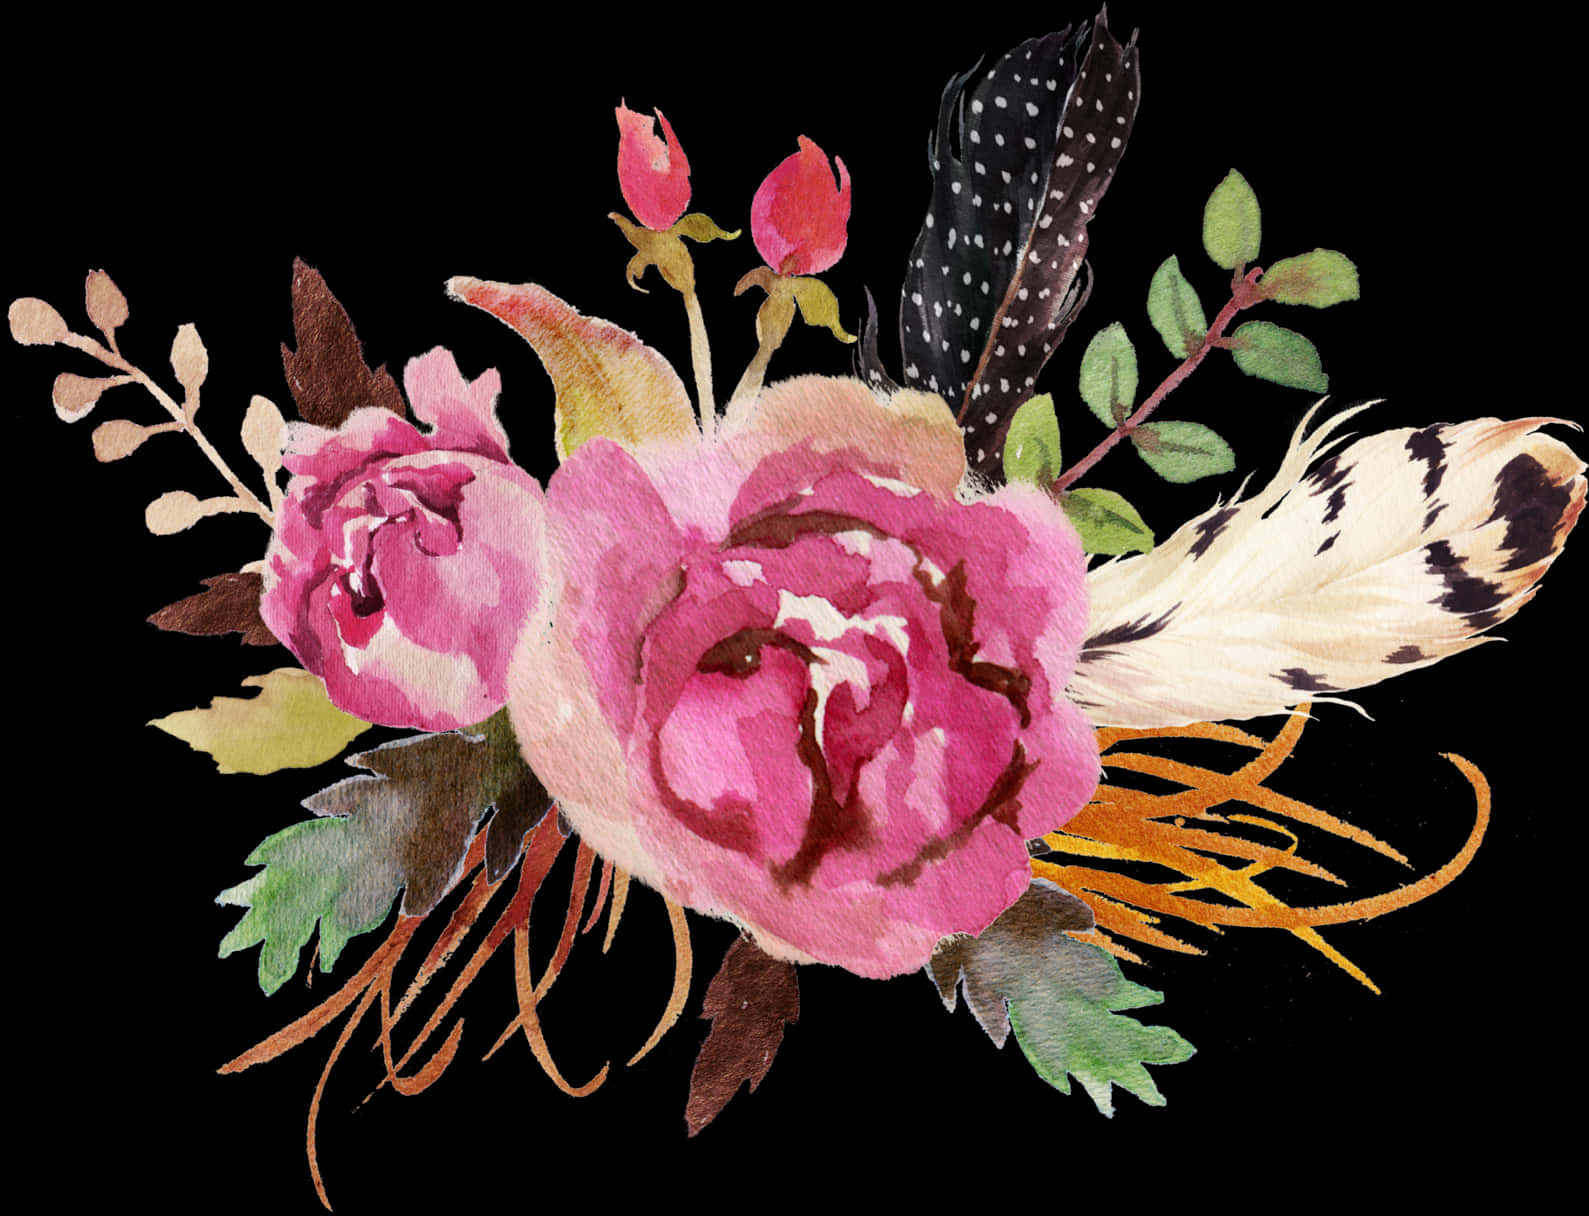 A Watercolor Painting Of Flowers And Feathers